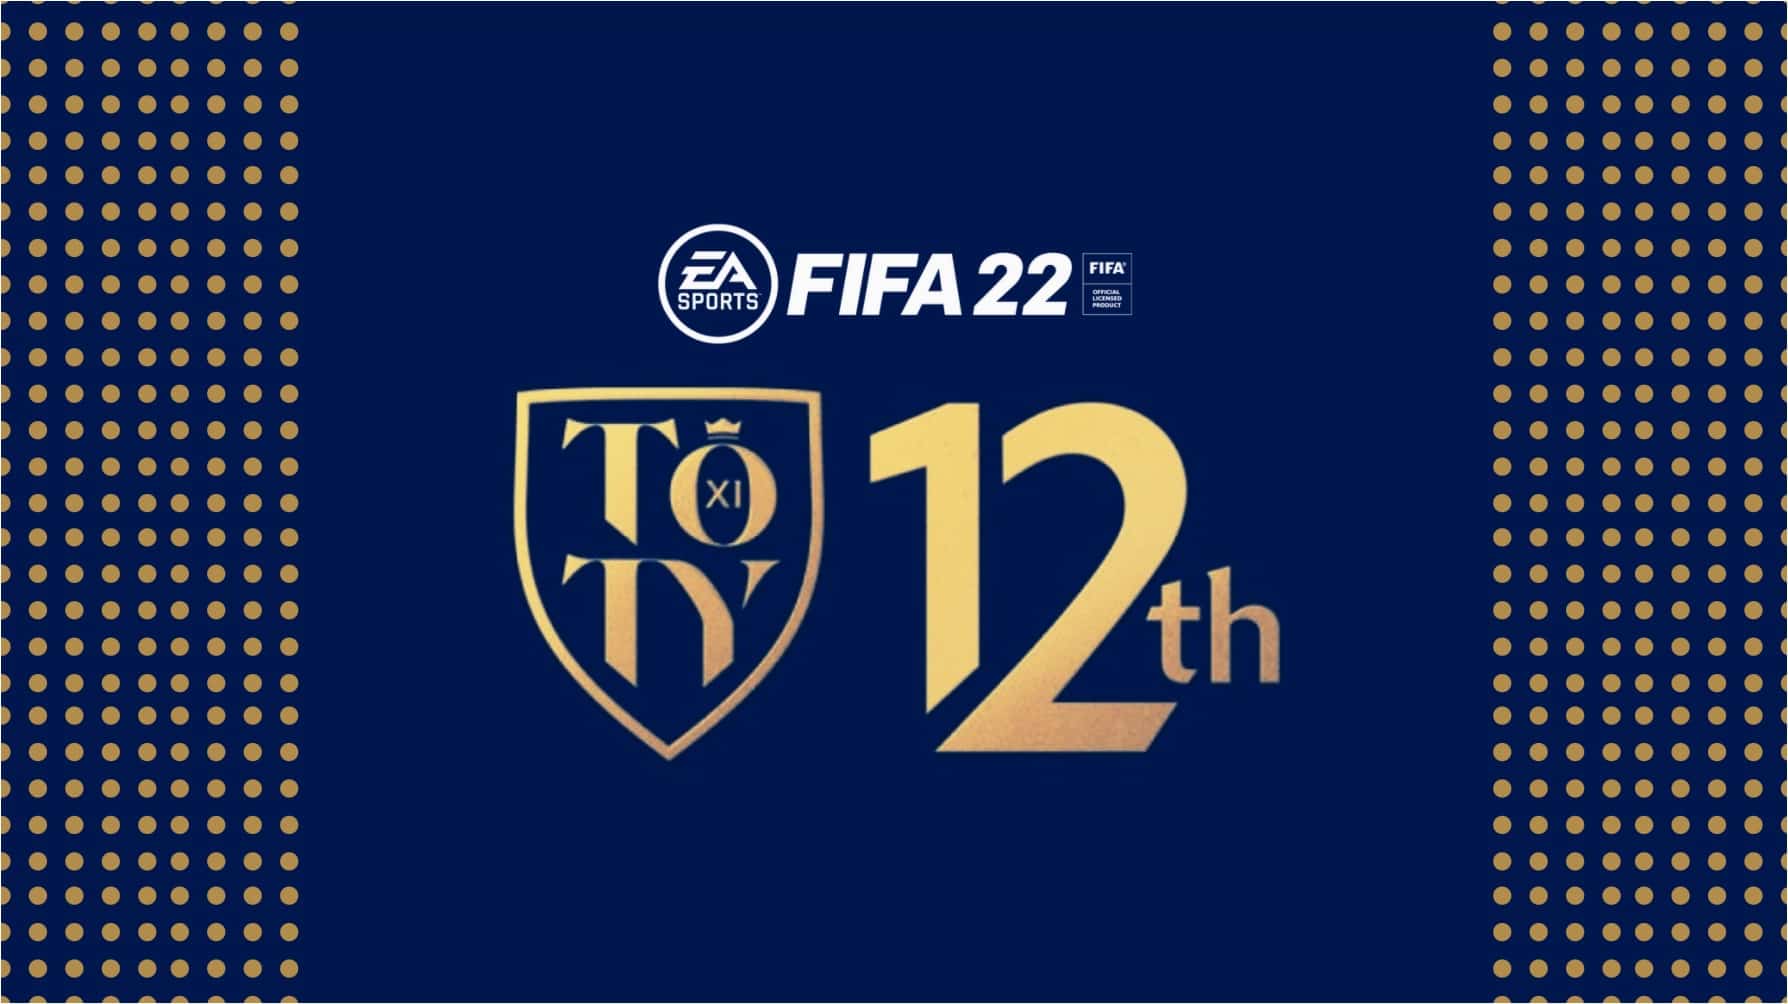 FIFA 22 TOTY 12TH MAN TEAM OF THE YEAR